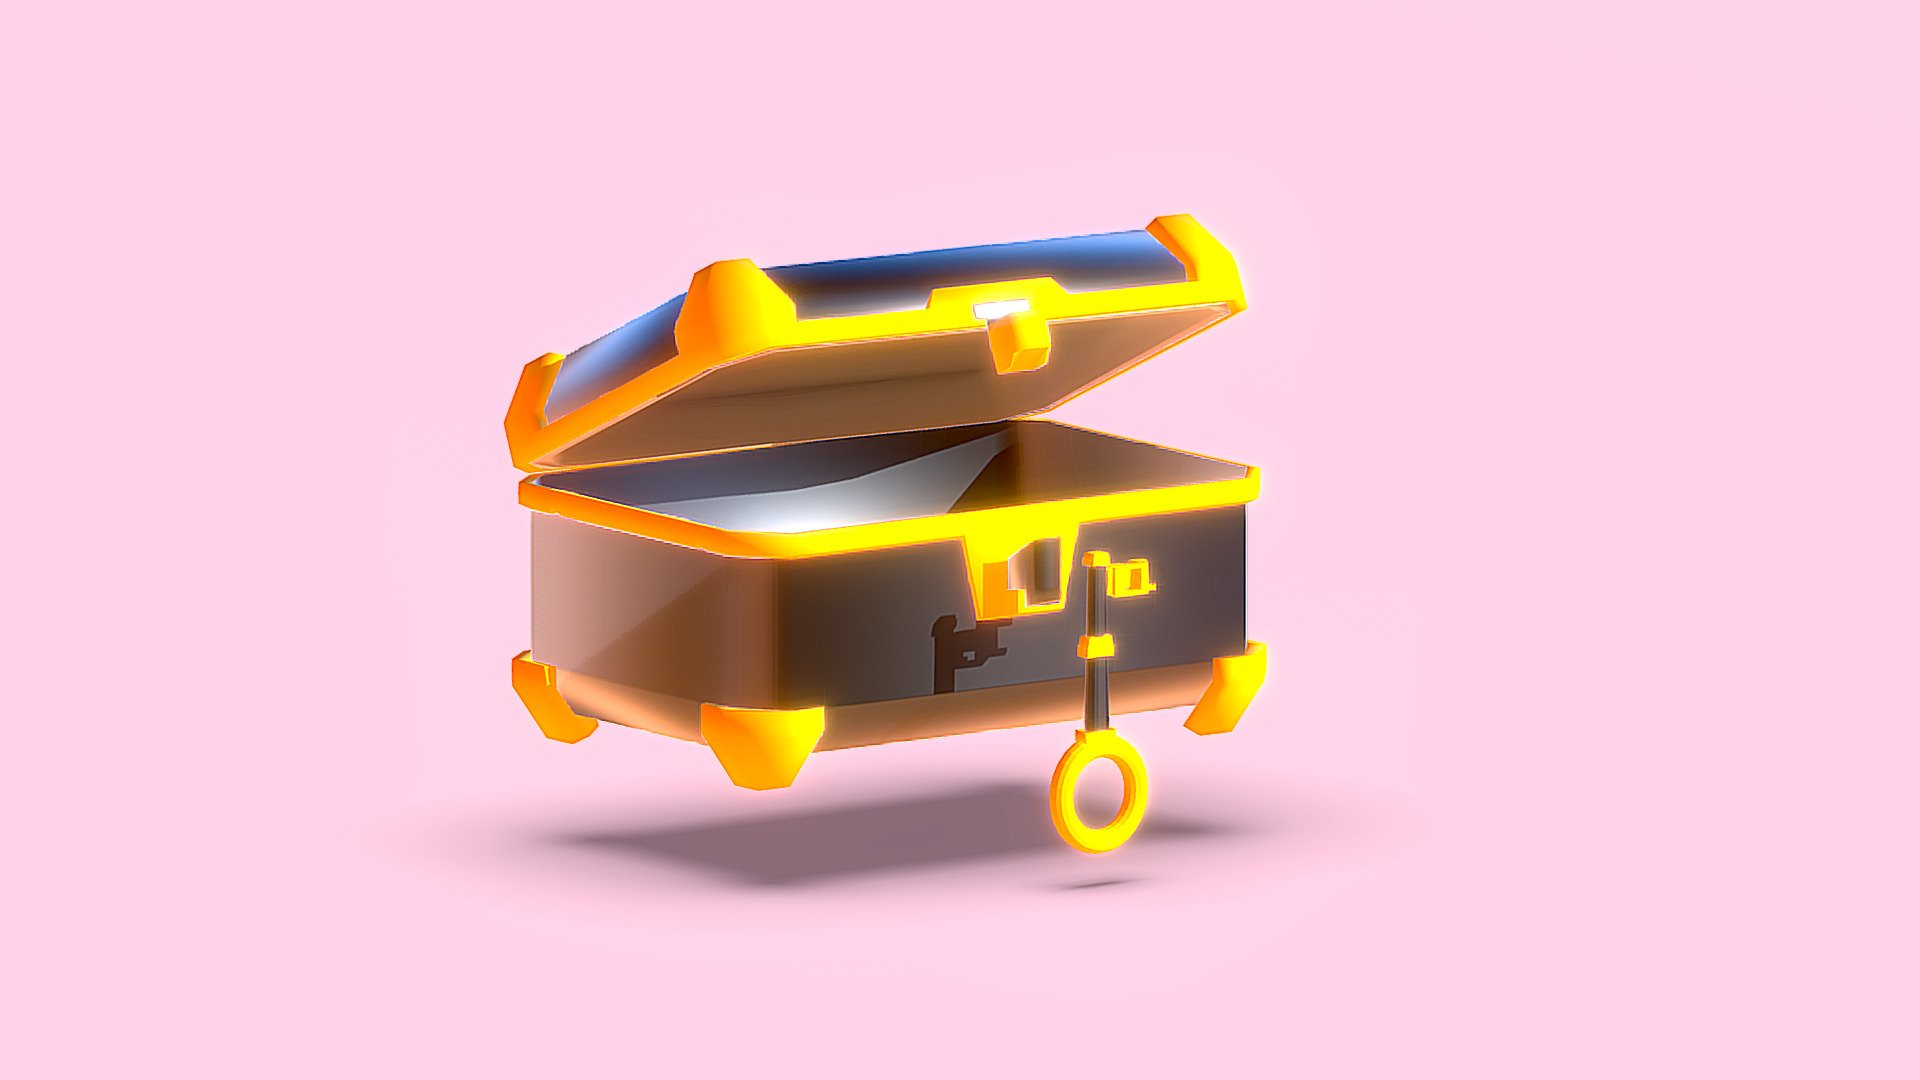 Little Lootbox with his key.

Included 3D formats : FBX, Blender, dae, glb, obj,
And 2 textures 3d model